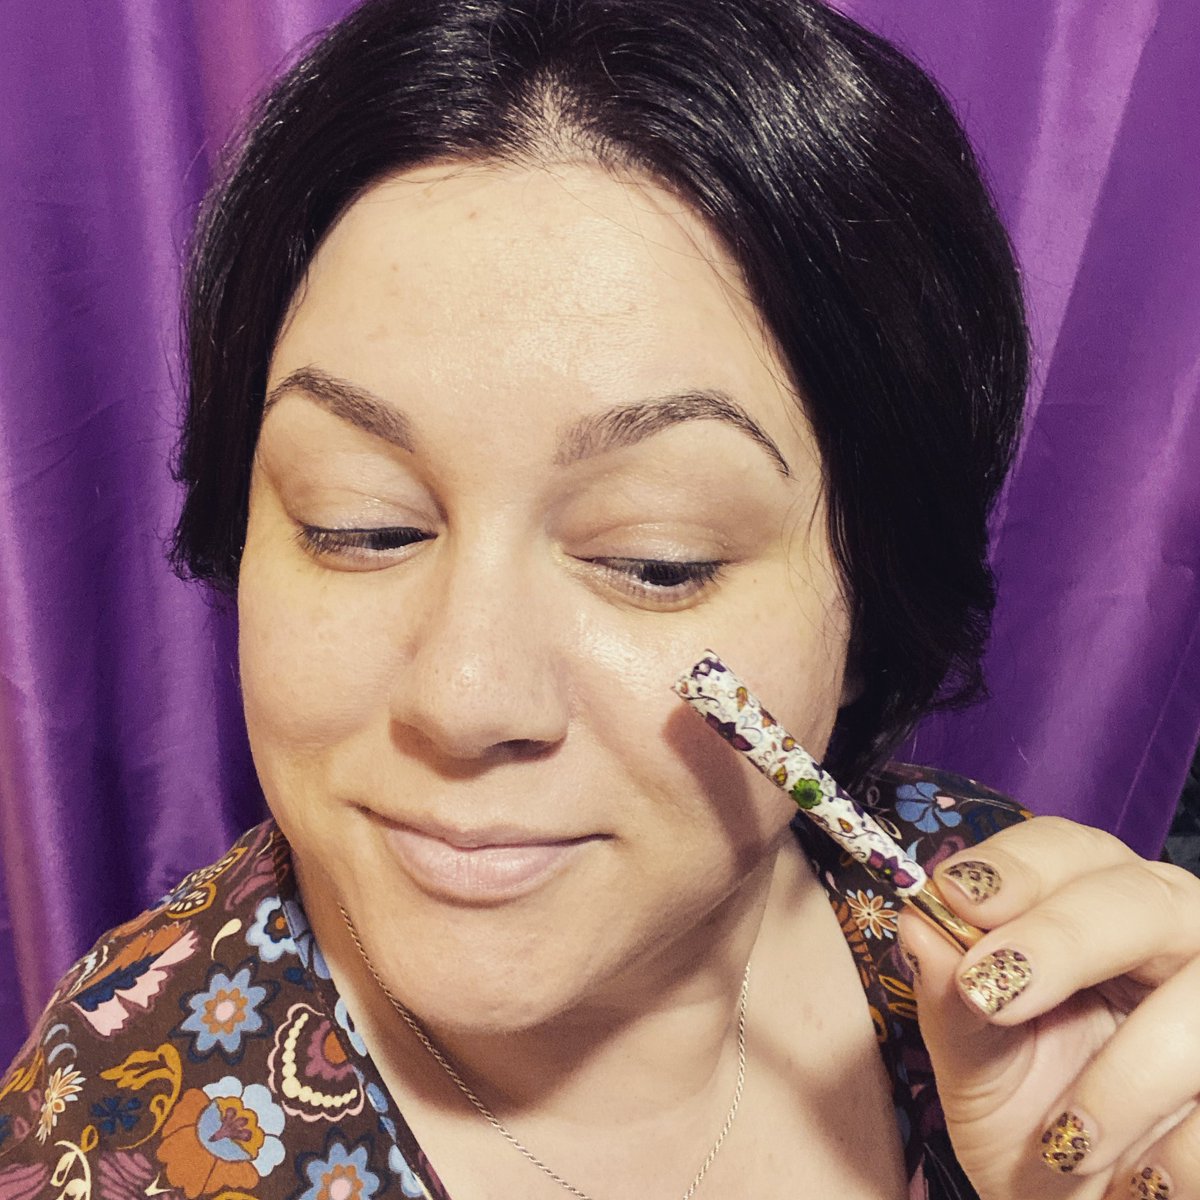 That moment you realize your pre-rolls are as bougie as your nails. 😎 #FancyAF #CannaMom #CannaMomGang #StonerMom #MomsWhoSmokeWeed #CannaMommy #CannabisMom #MomLife